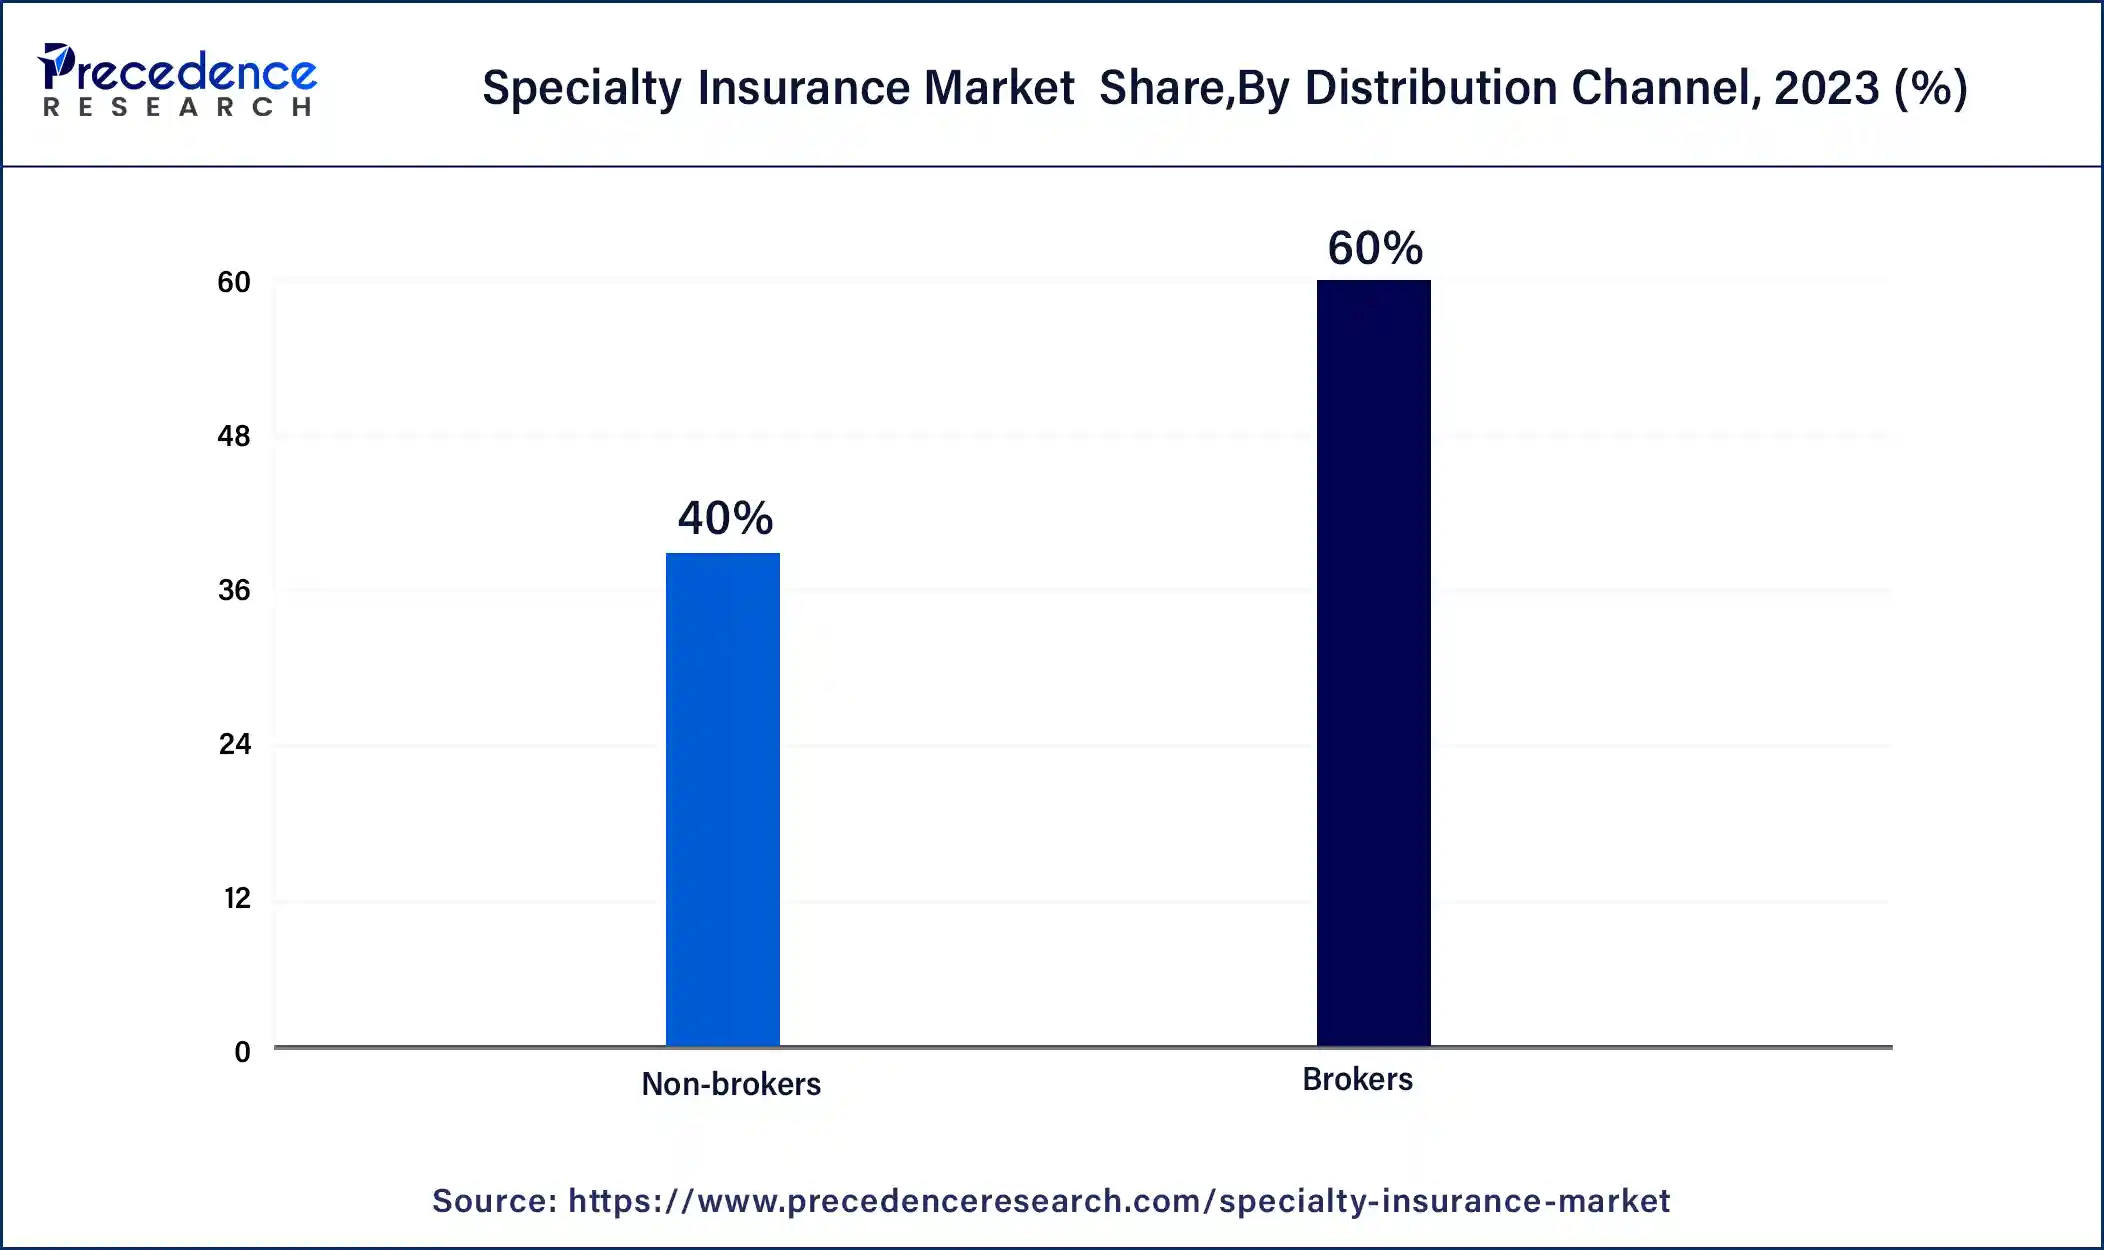 Specialty Insurance Market Share, By Distribution Channel, 2023 (%)